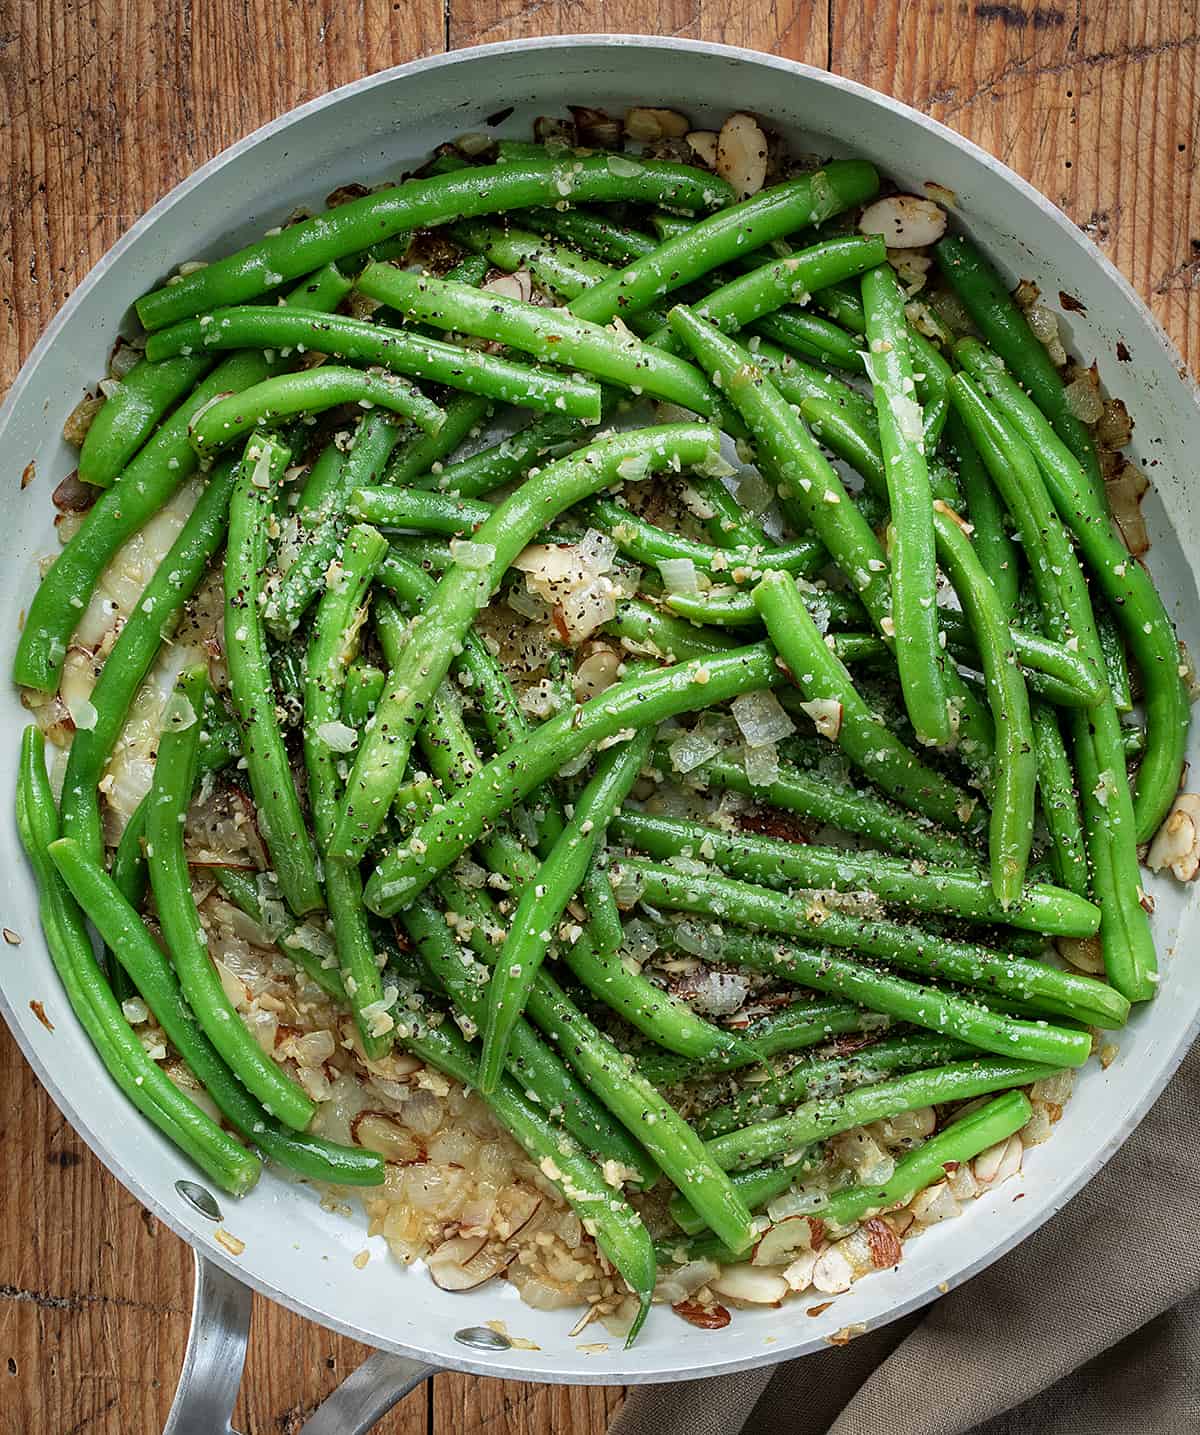 White Pan of Green Beans Almondine on a Wooden Cutting Board.